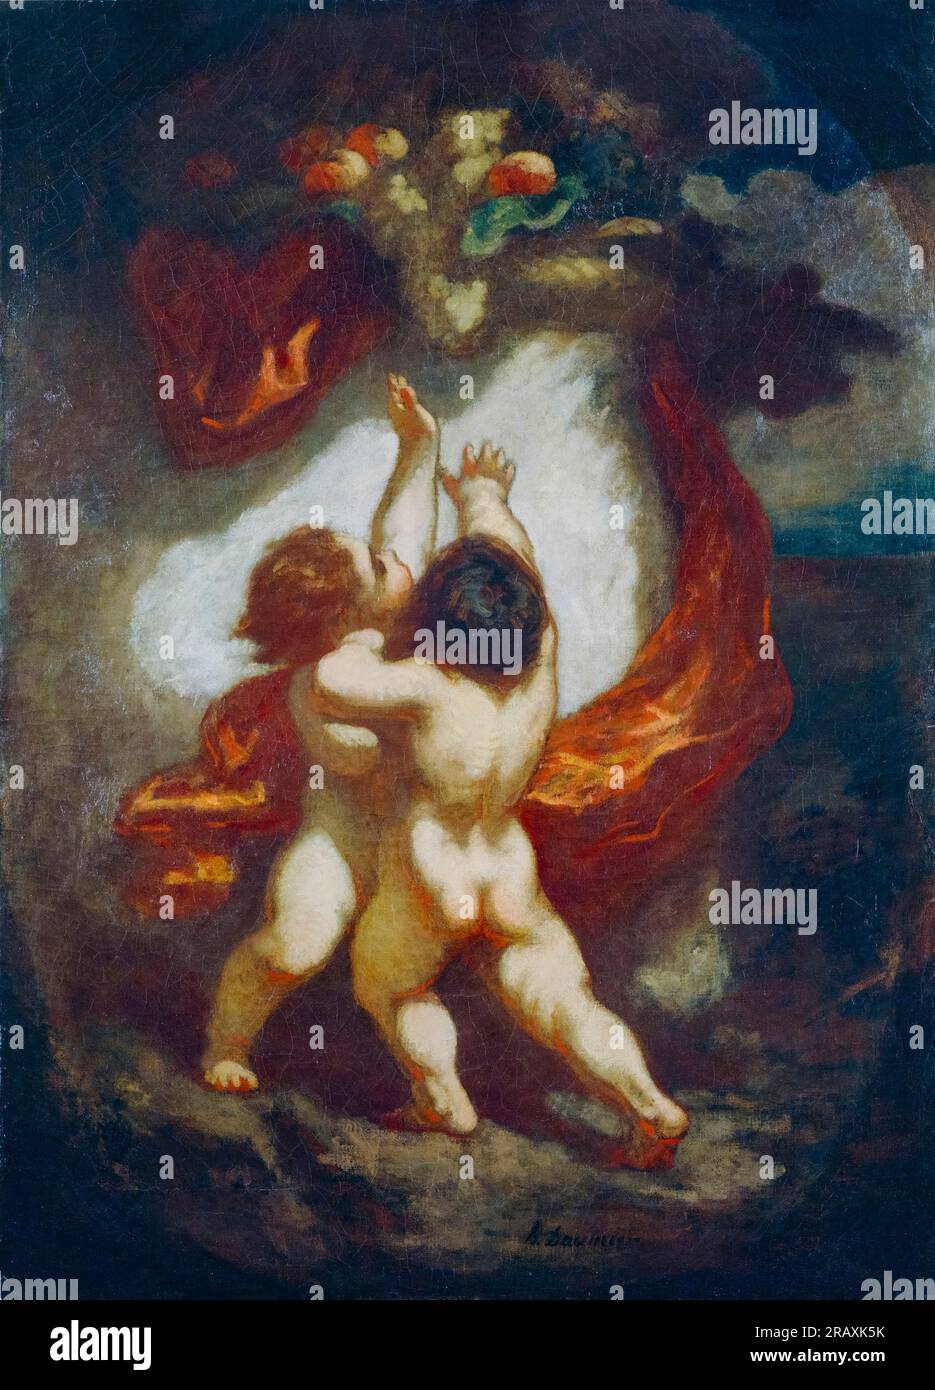 Honoré Daumier, Two Putti Striving for Fruits, painting in oil on canvas, circa 1845 Stock Photo